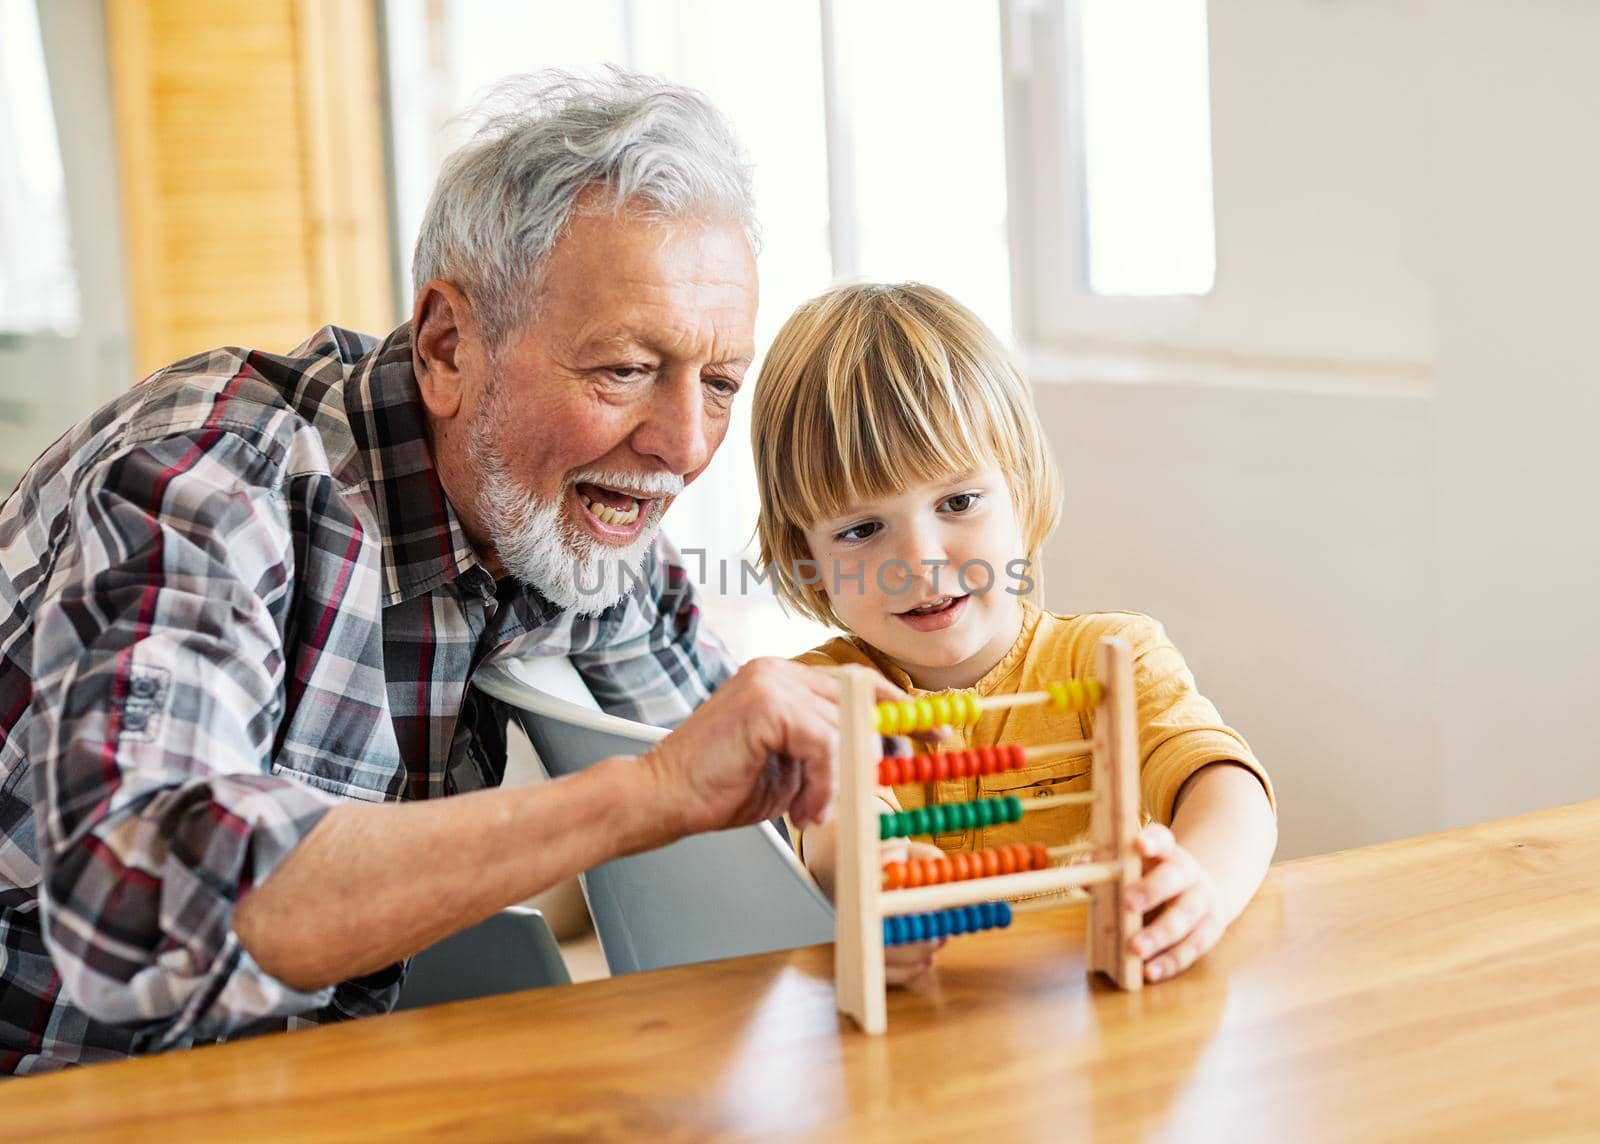 Portrait of grandfather and grandson having fun with an abacus tool or toy doing mathematic calculation and learning together at home